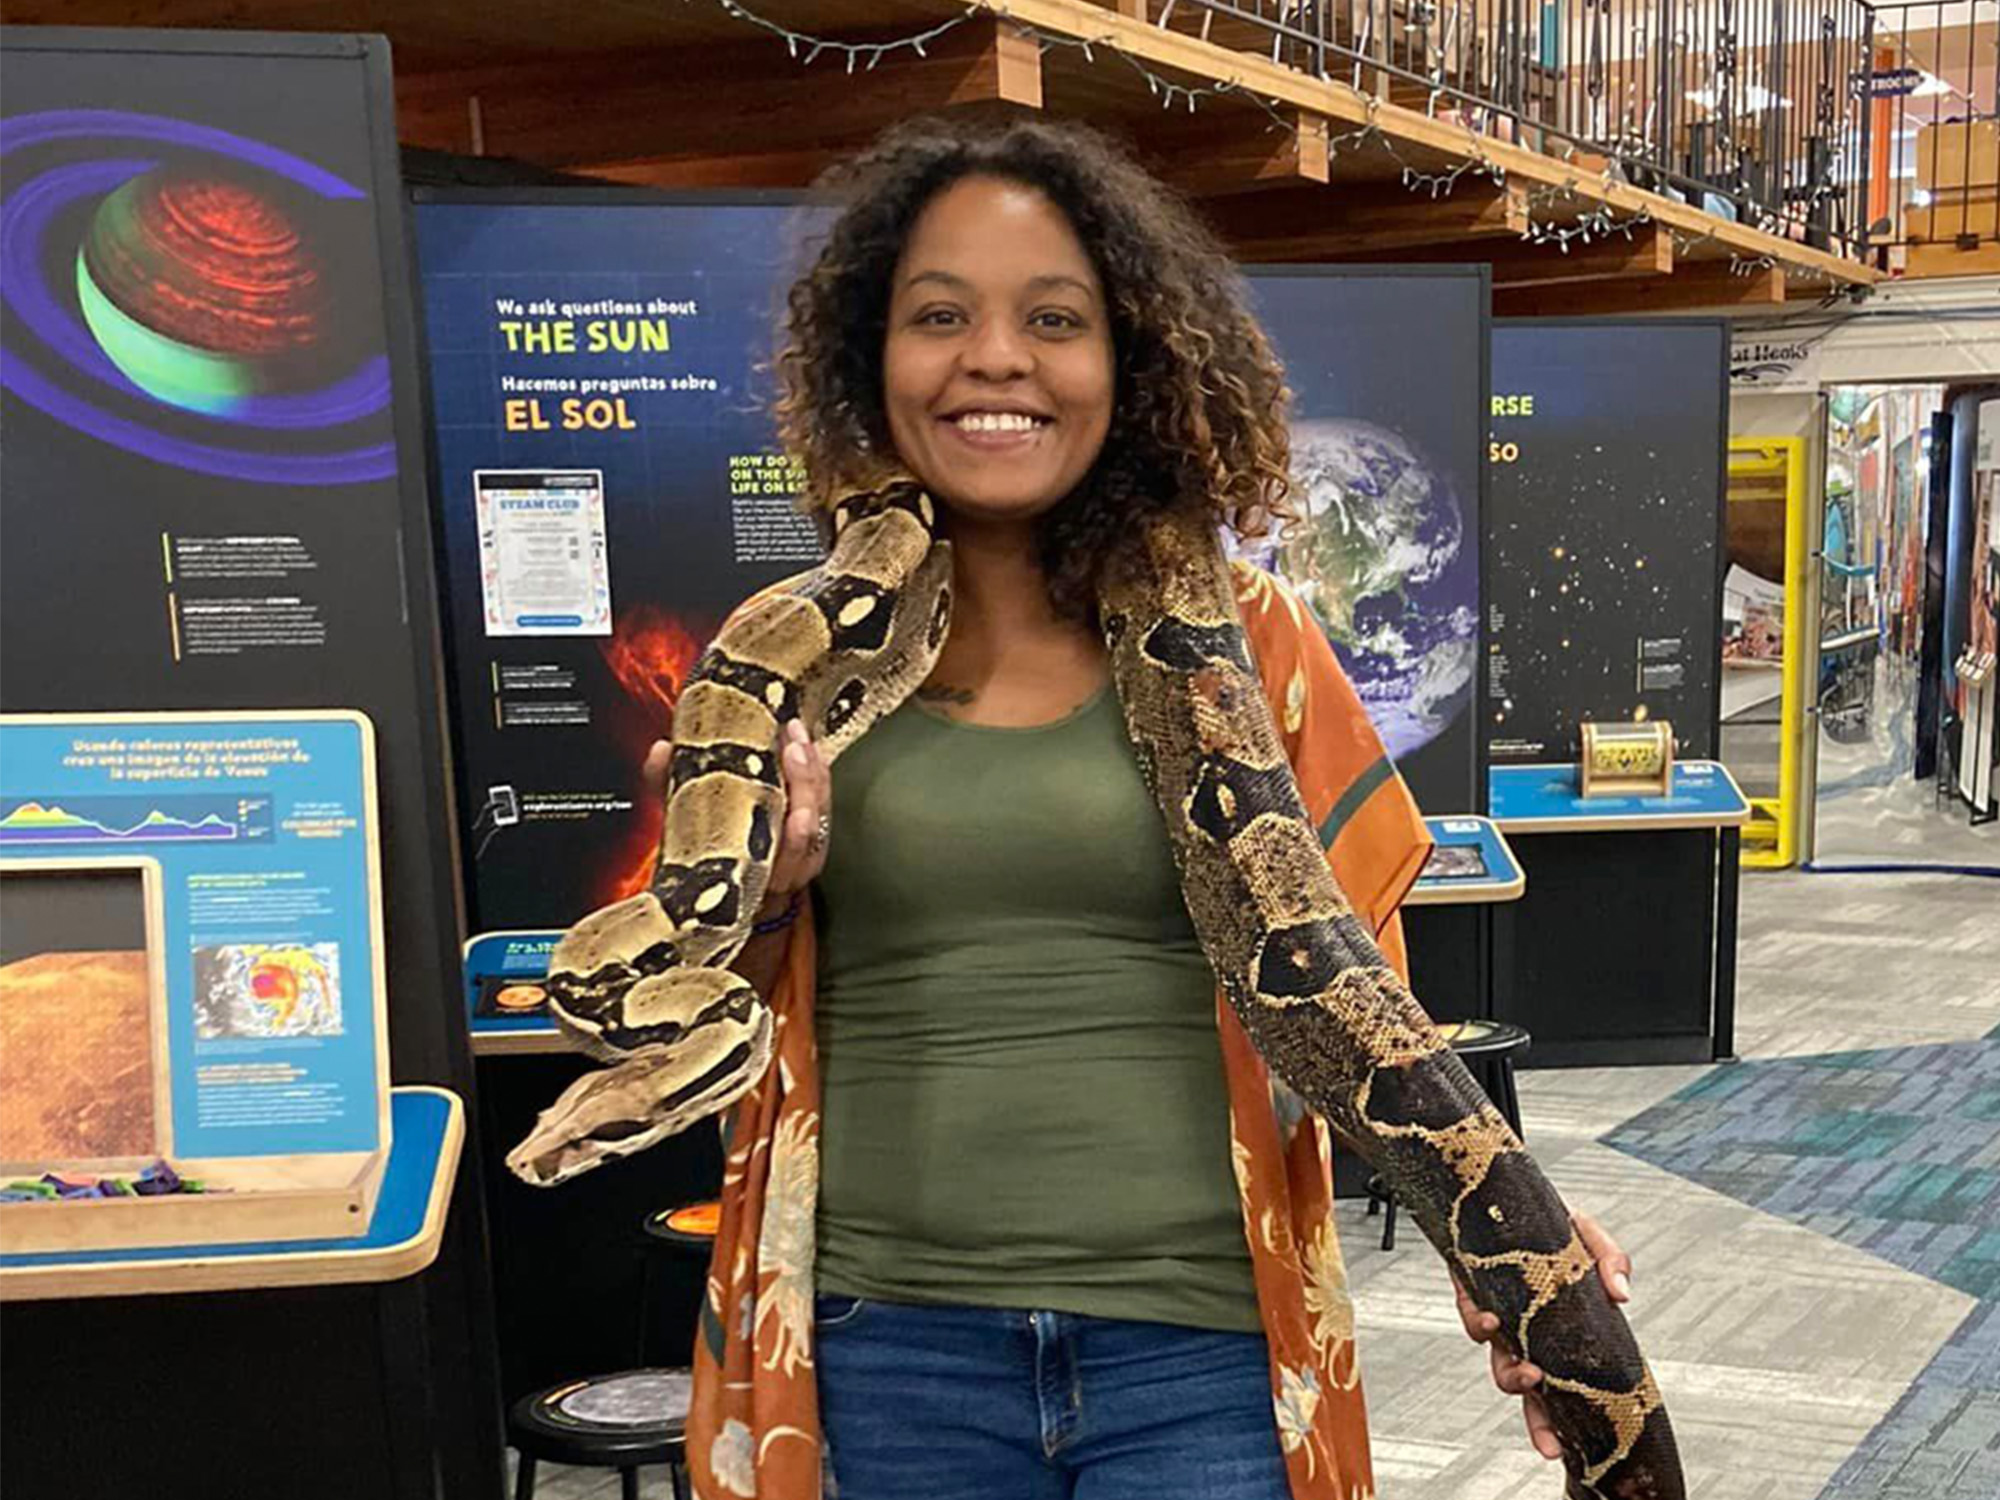 A woman holding a snake in an exhibit hall